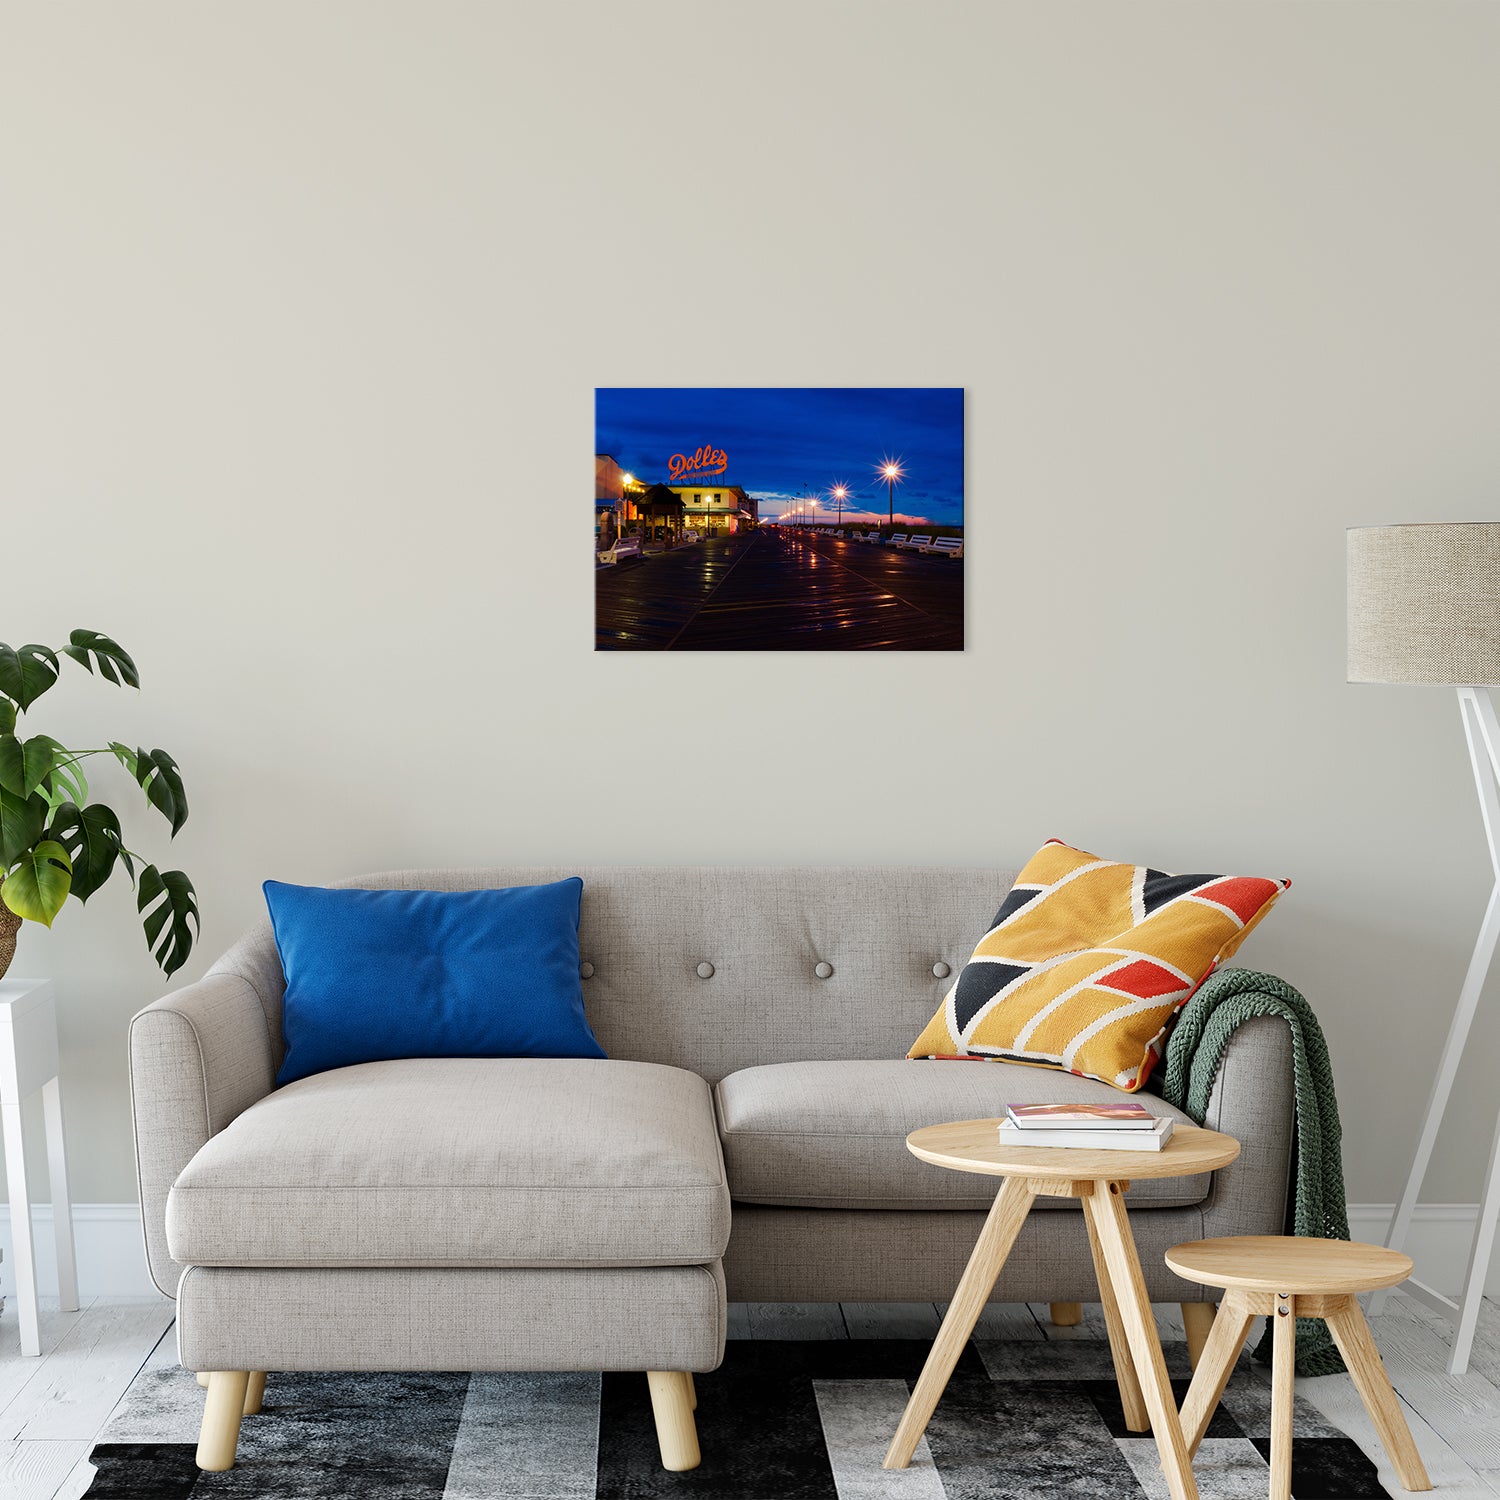 Early Morning at Dolles Night Photo Fine Art Canvas Wall Art Prints 20" x 24" / Fine Art Canvas - PIPAFINEART